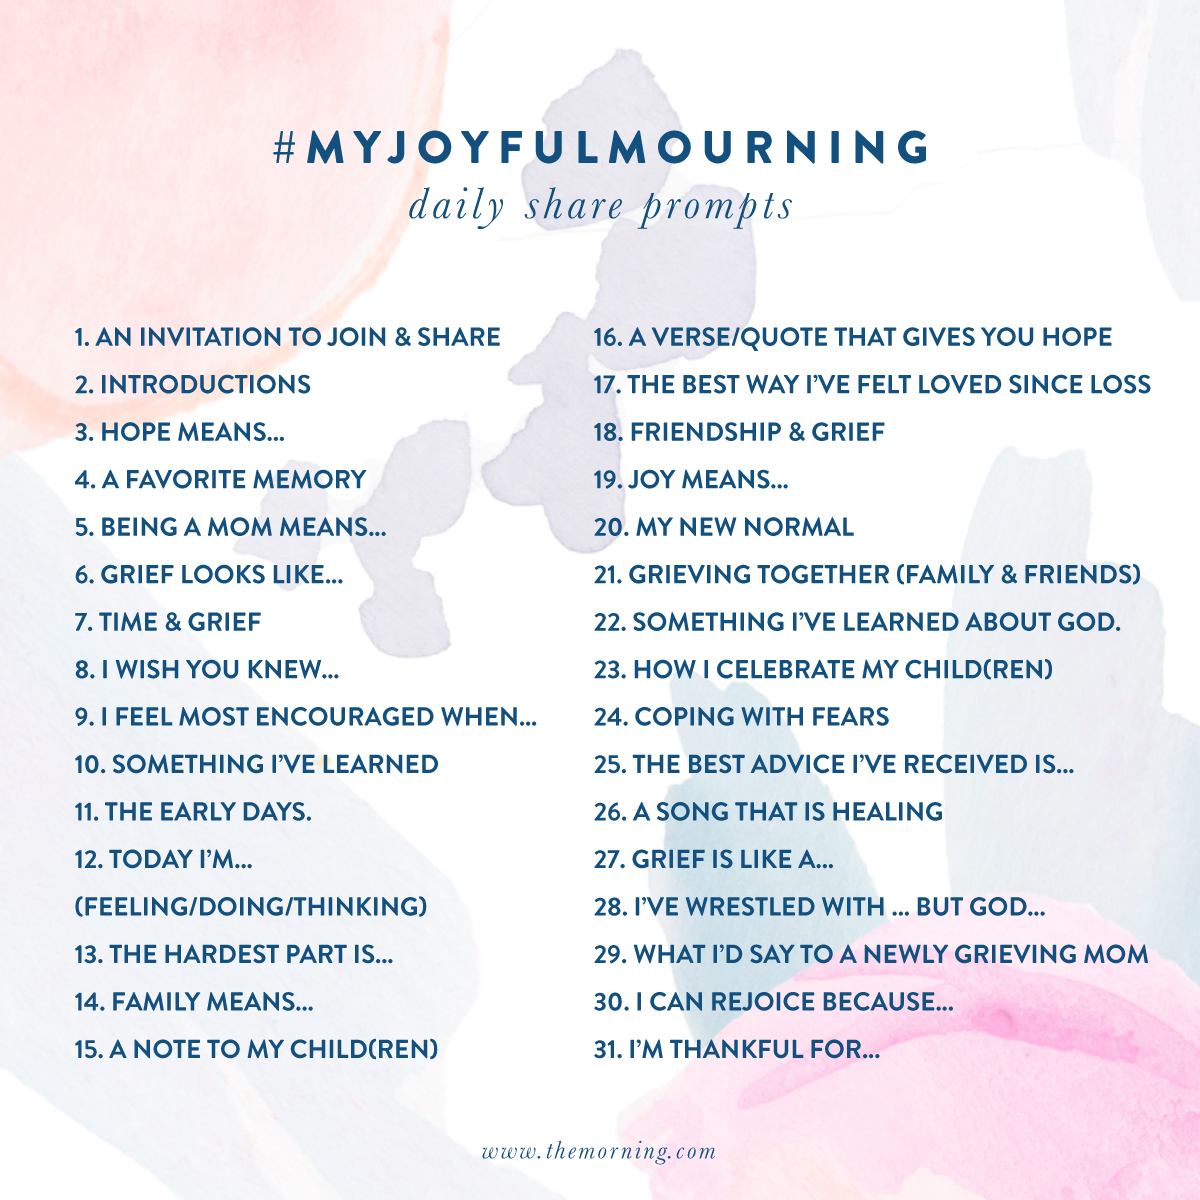 Pregnancy & Infant Loss Awareness Month Social Share Prompts | #myjoyfulmourning | The Morning: A community of hope for women finding joy after pregnancy and infant loss